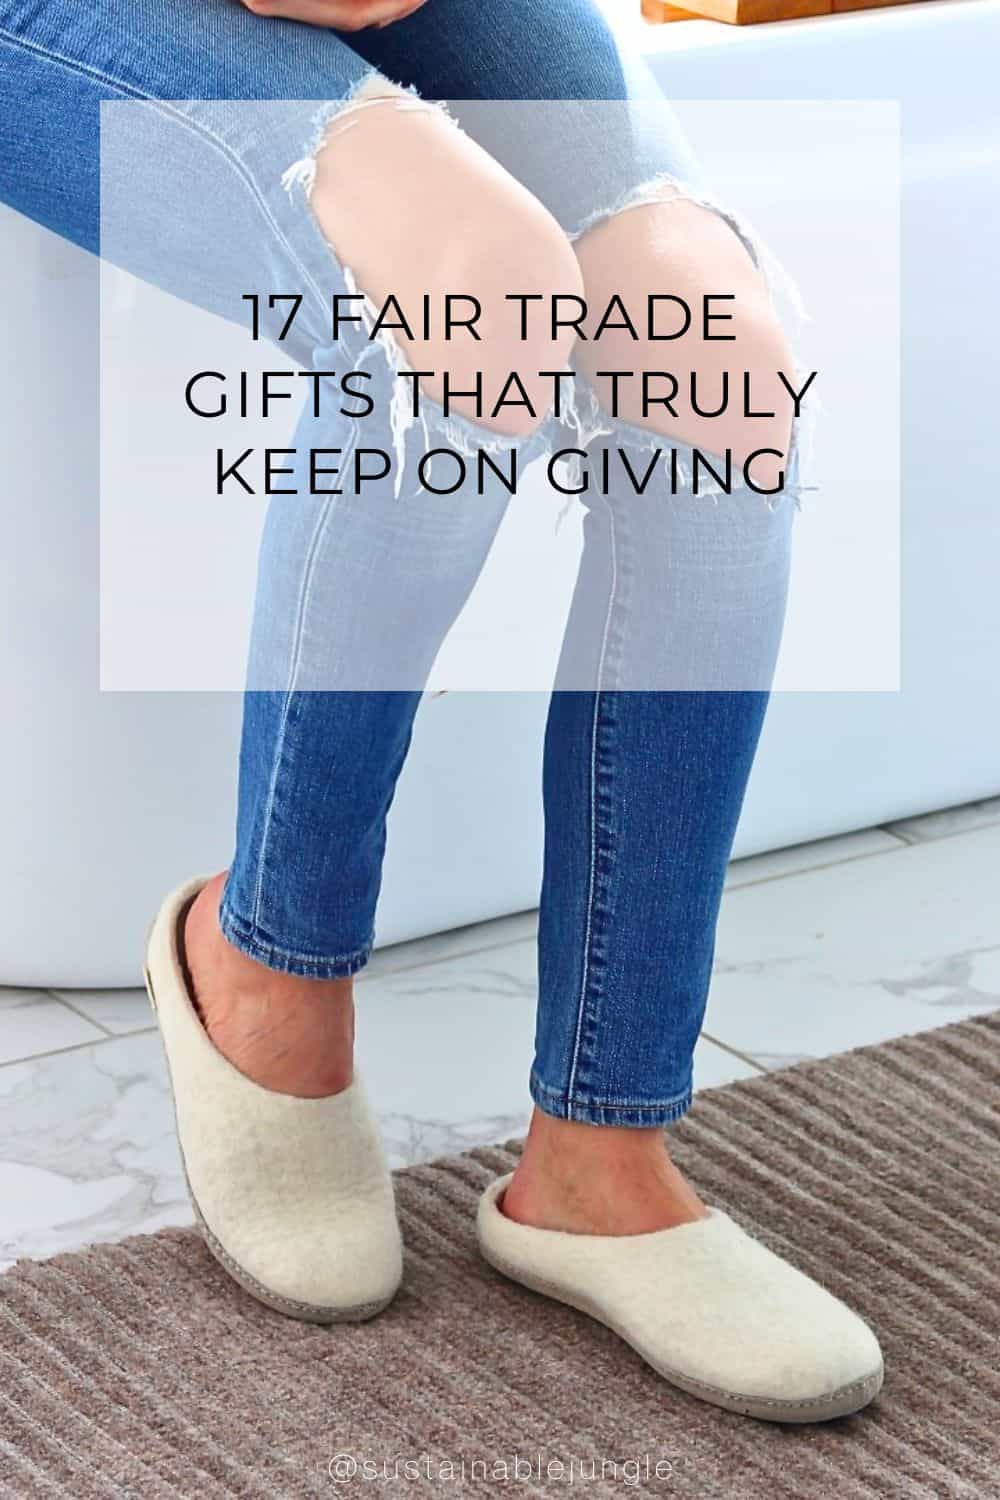 17 Fair Trade Gifts That Truly Keep On Giving Image by Nootkas #fairtradegifts #fairtradechristmasgifts #fairtradegiftsforher #bestfairtradegifts #fairtradeholidaygifts #ethicalfairtradegifts #sustainablejungle